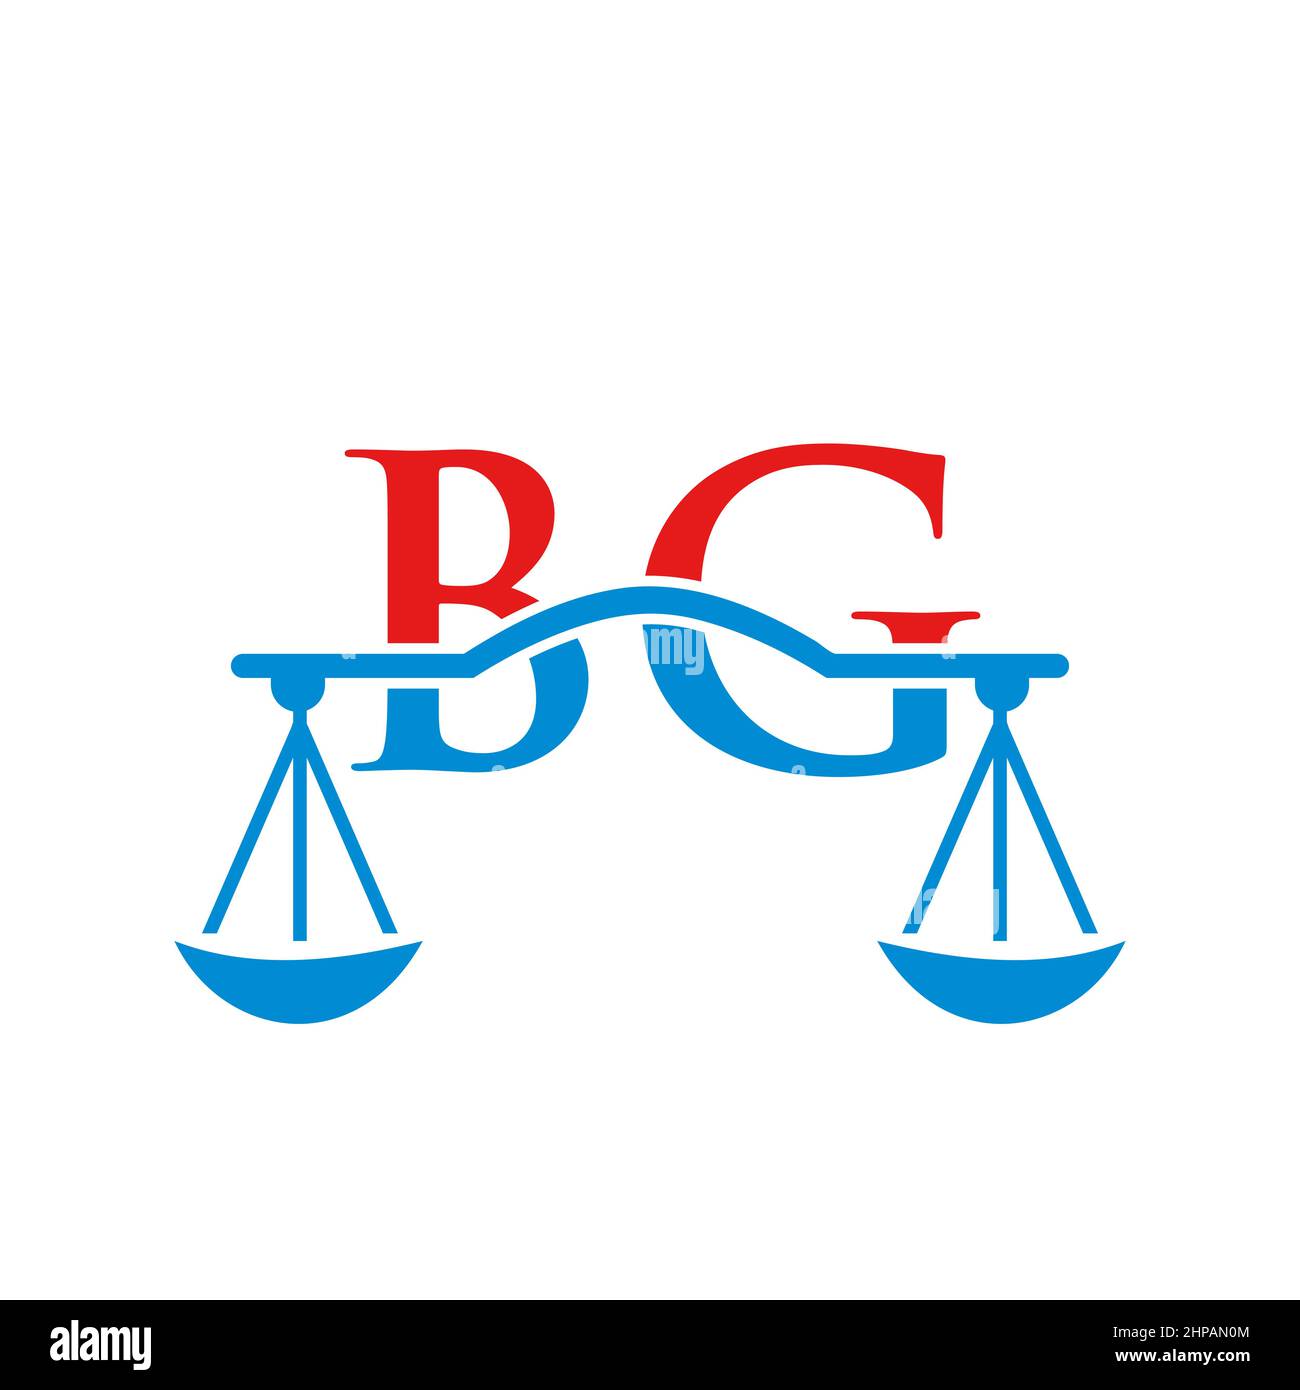 Law Firm Letter BG Logo Design. Lawyer, Justice, Law Attorney, Legal, Lawyer Service, Law Office, Scale. Law Logo On BG Letter Sign Stock Vector